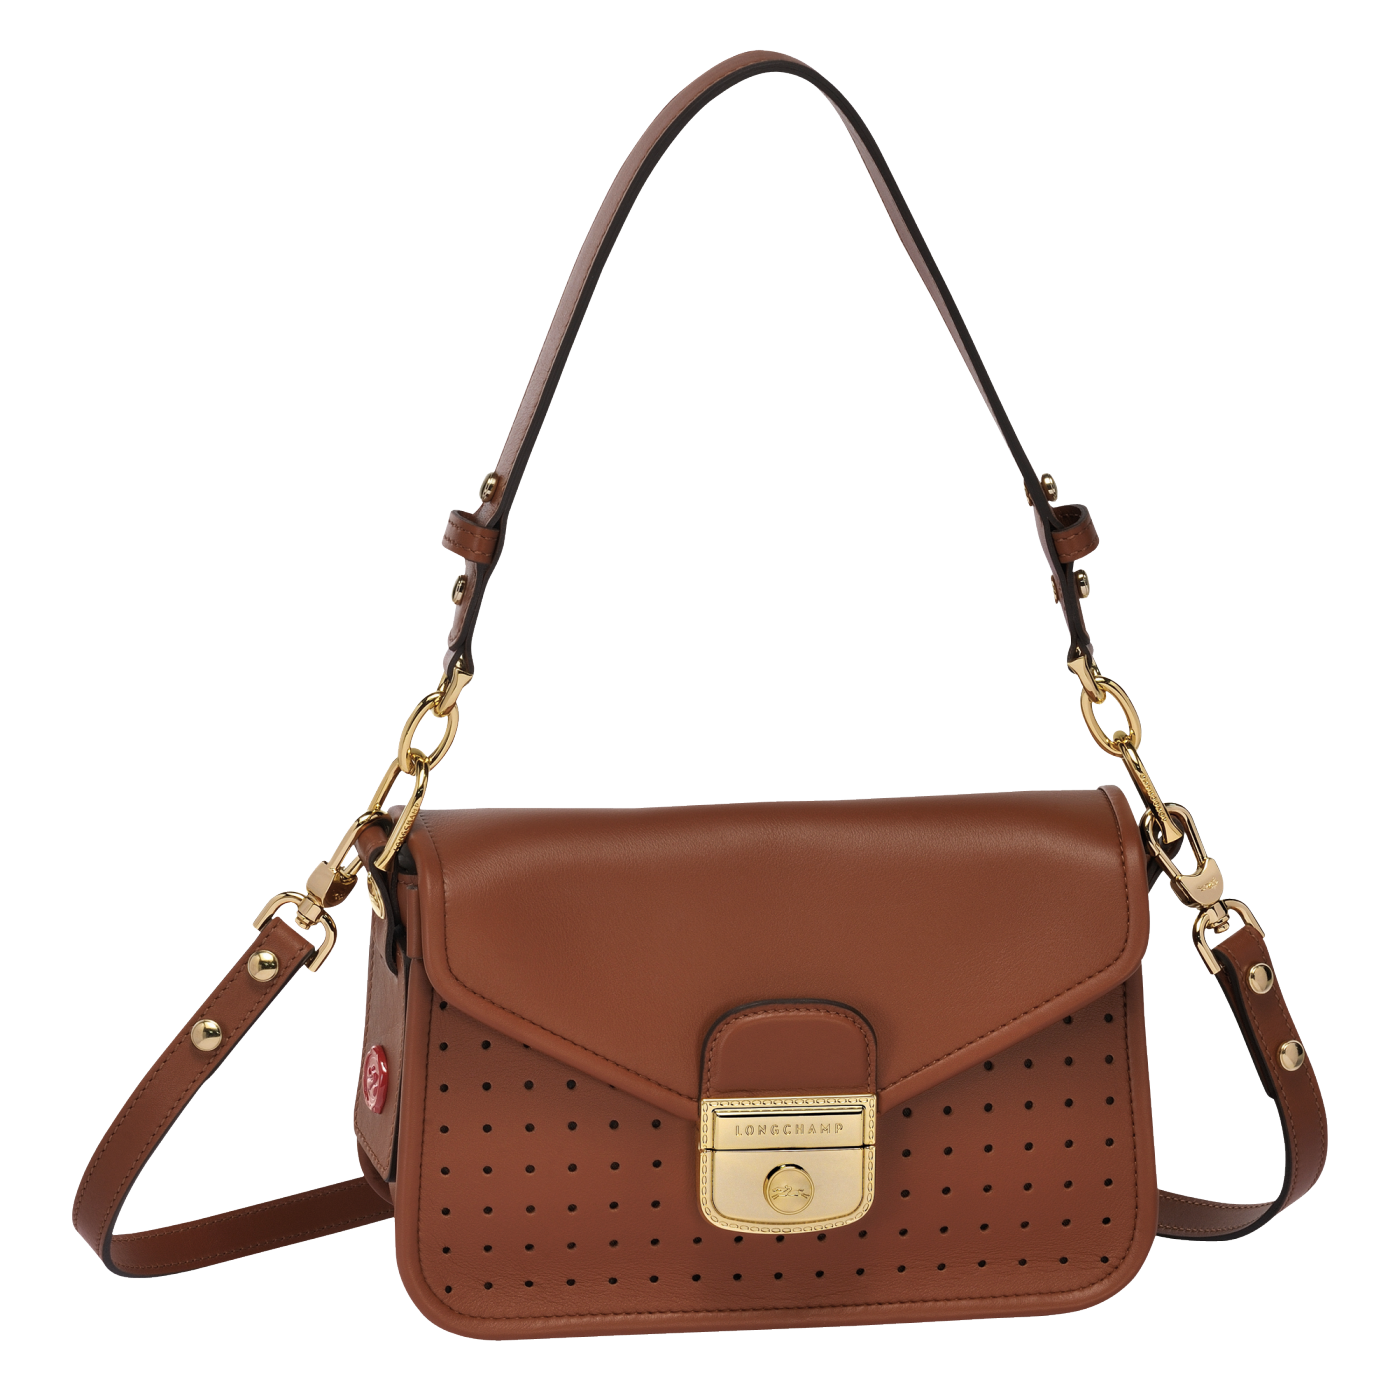 Shop The Latest Collection Of Outlet - Longchamp Mademoiselle Longchamp Crossbody Bag - 2038883 In Lebanon